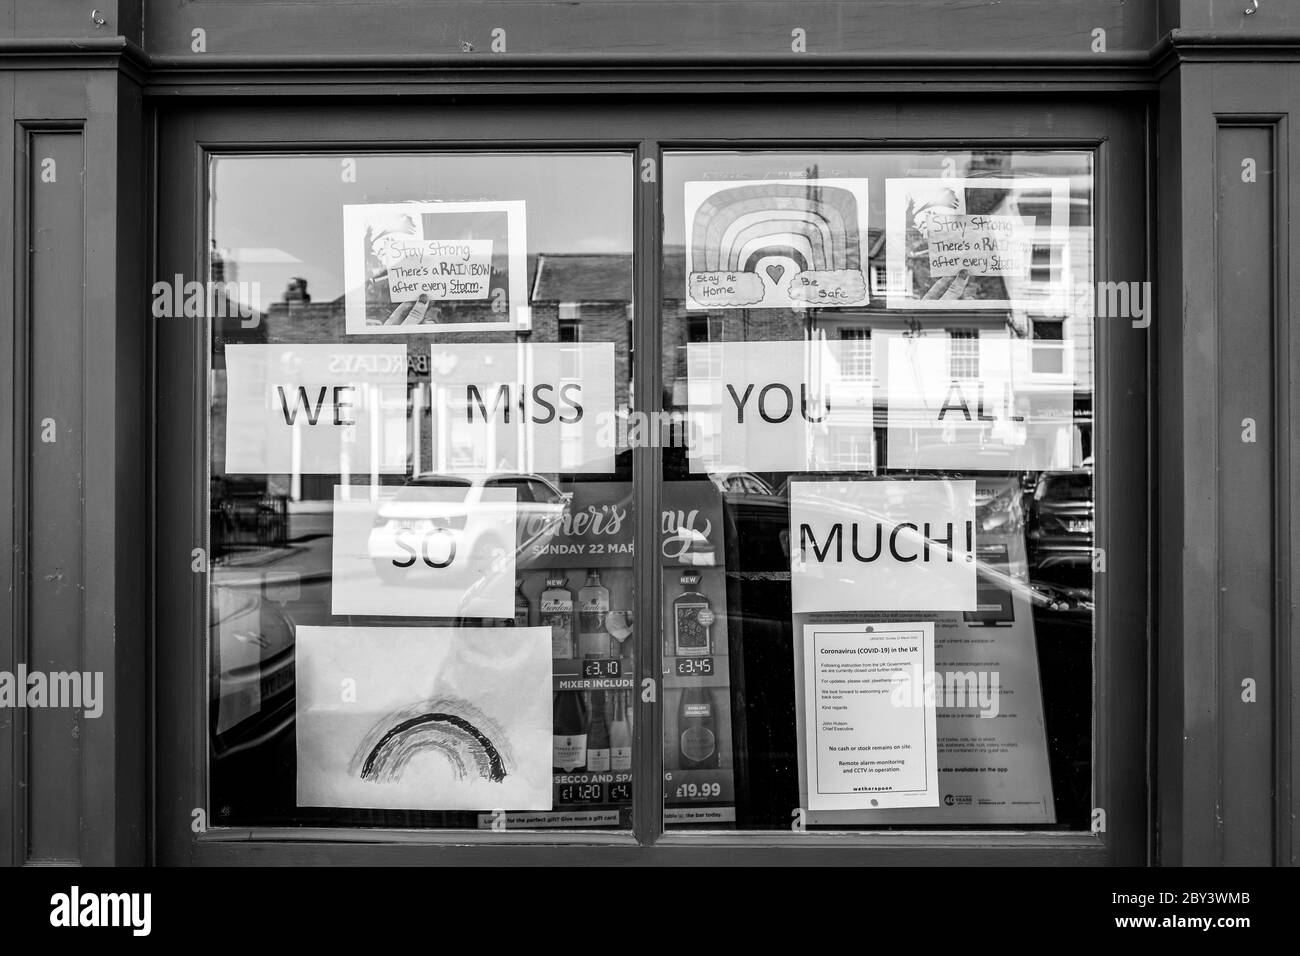 Monochrome view of a popular high street drinking establishment seen in lockdown. Messages of support and drawn rainbow images are seen in the window. Stock Photo